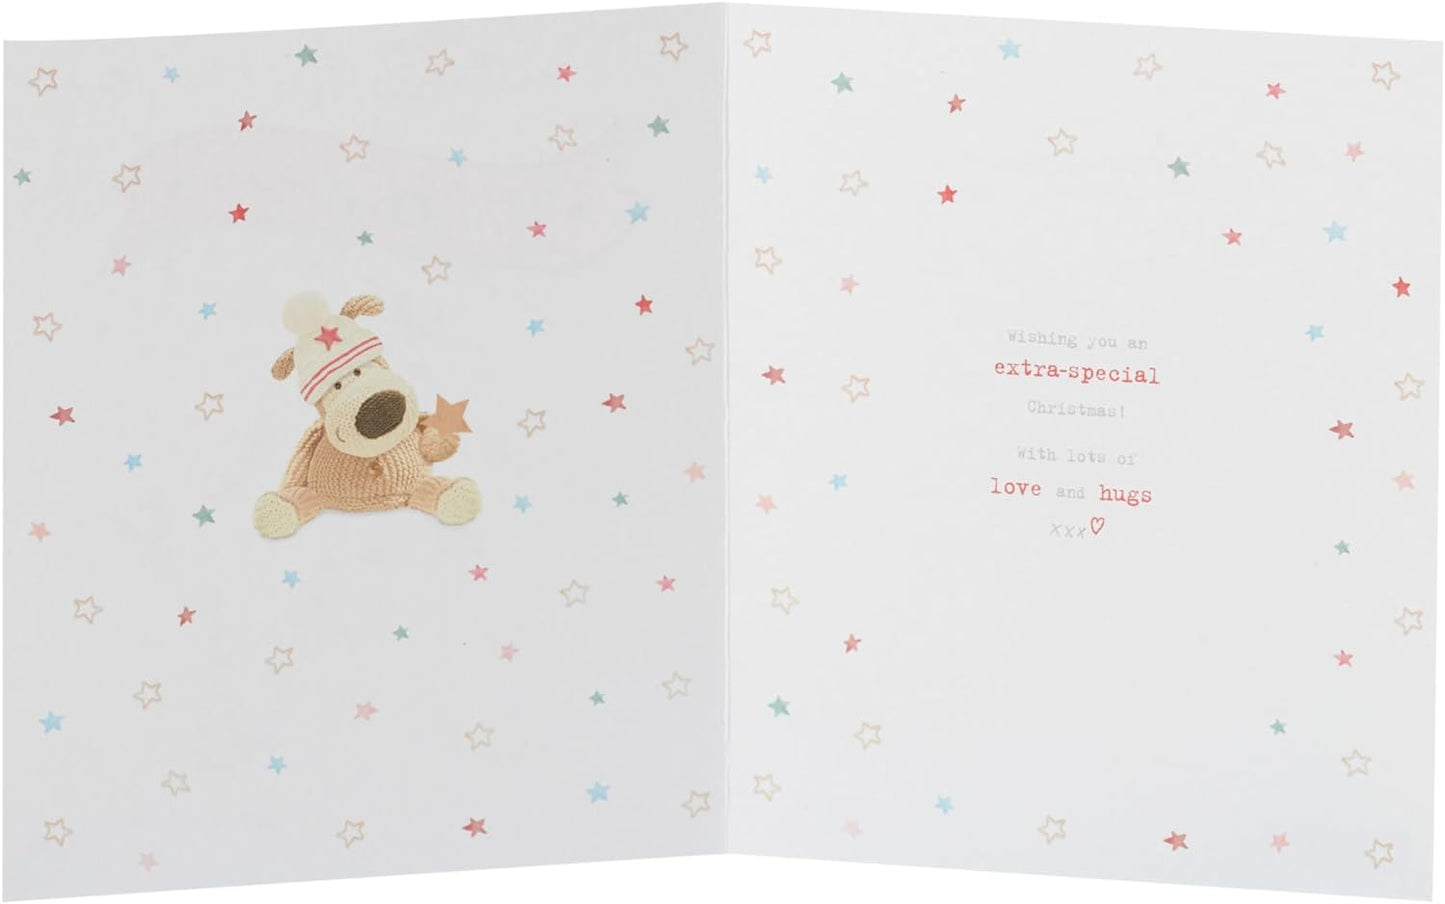 Very Special Girl On Your 1st Christmas Card Cute Boofle